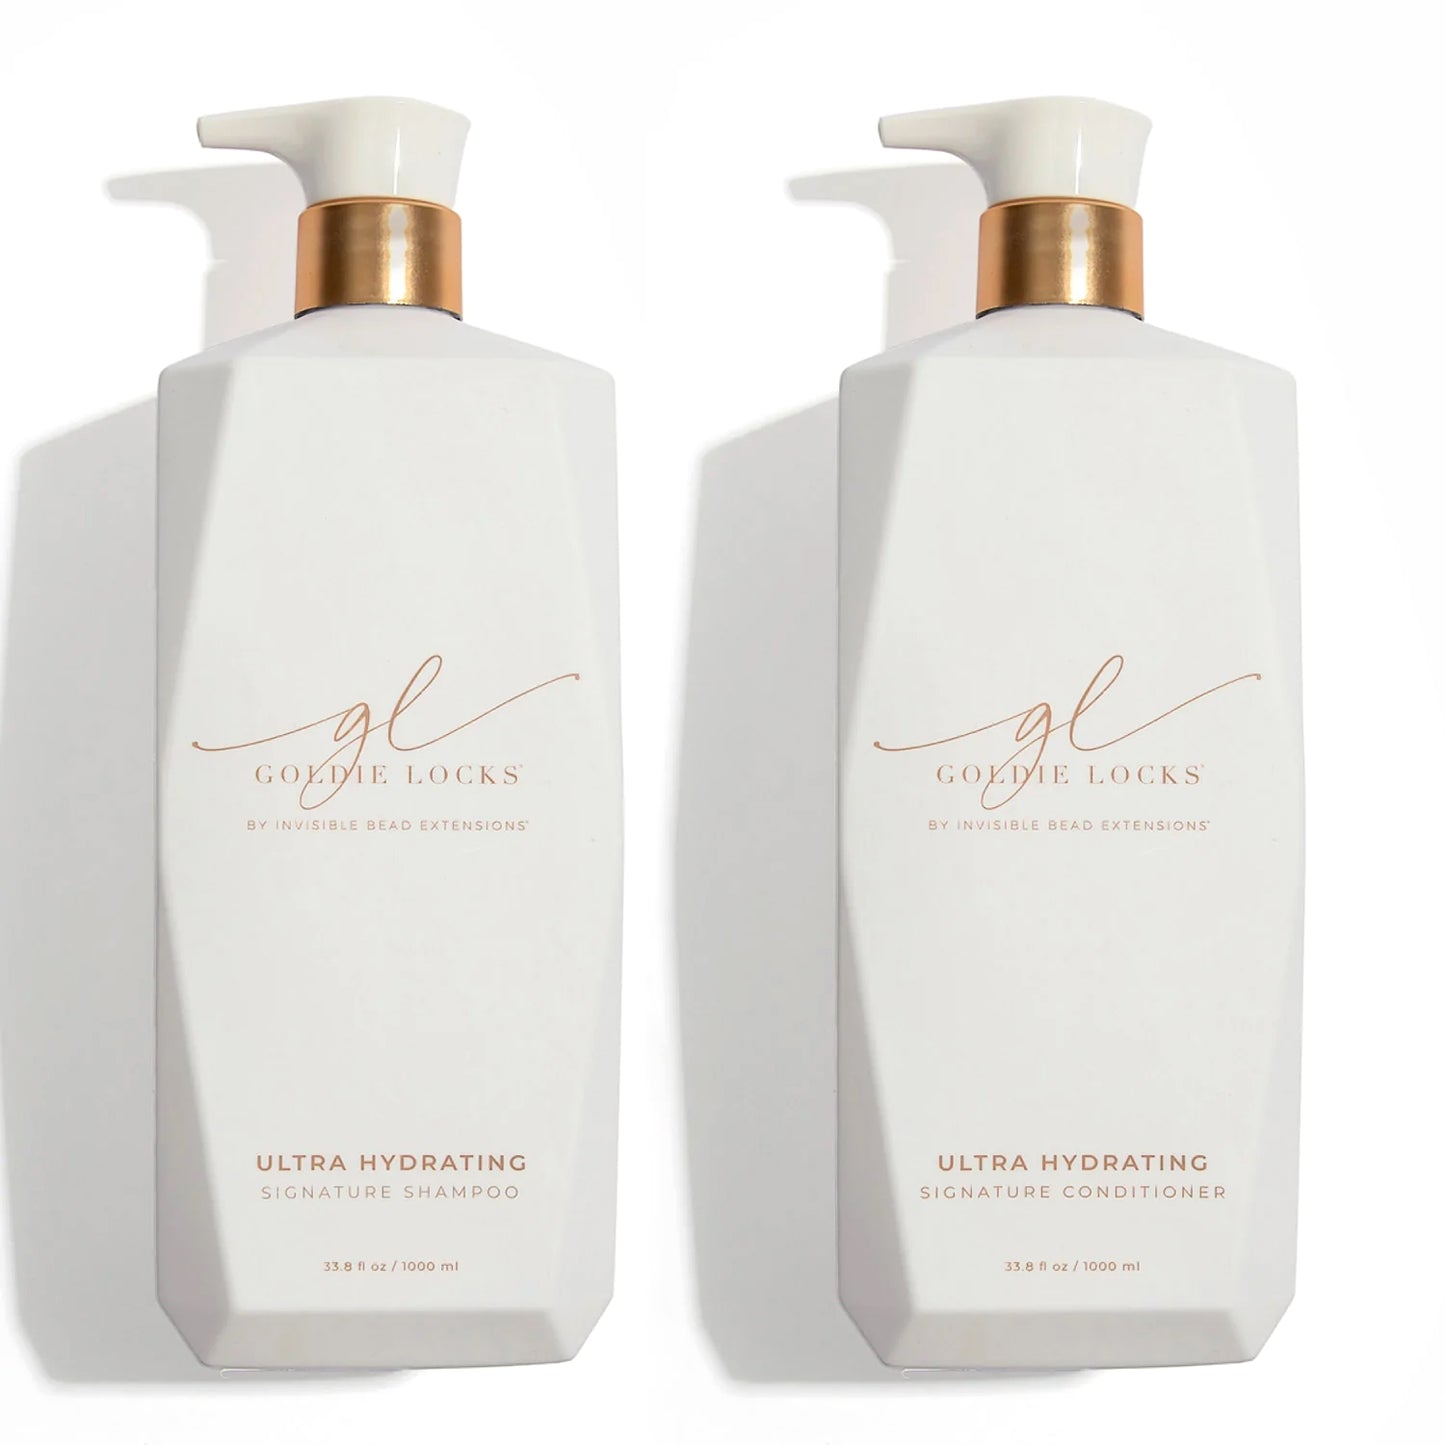 Ultimate Duo shampoo and conditioner liters